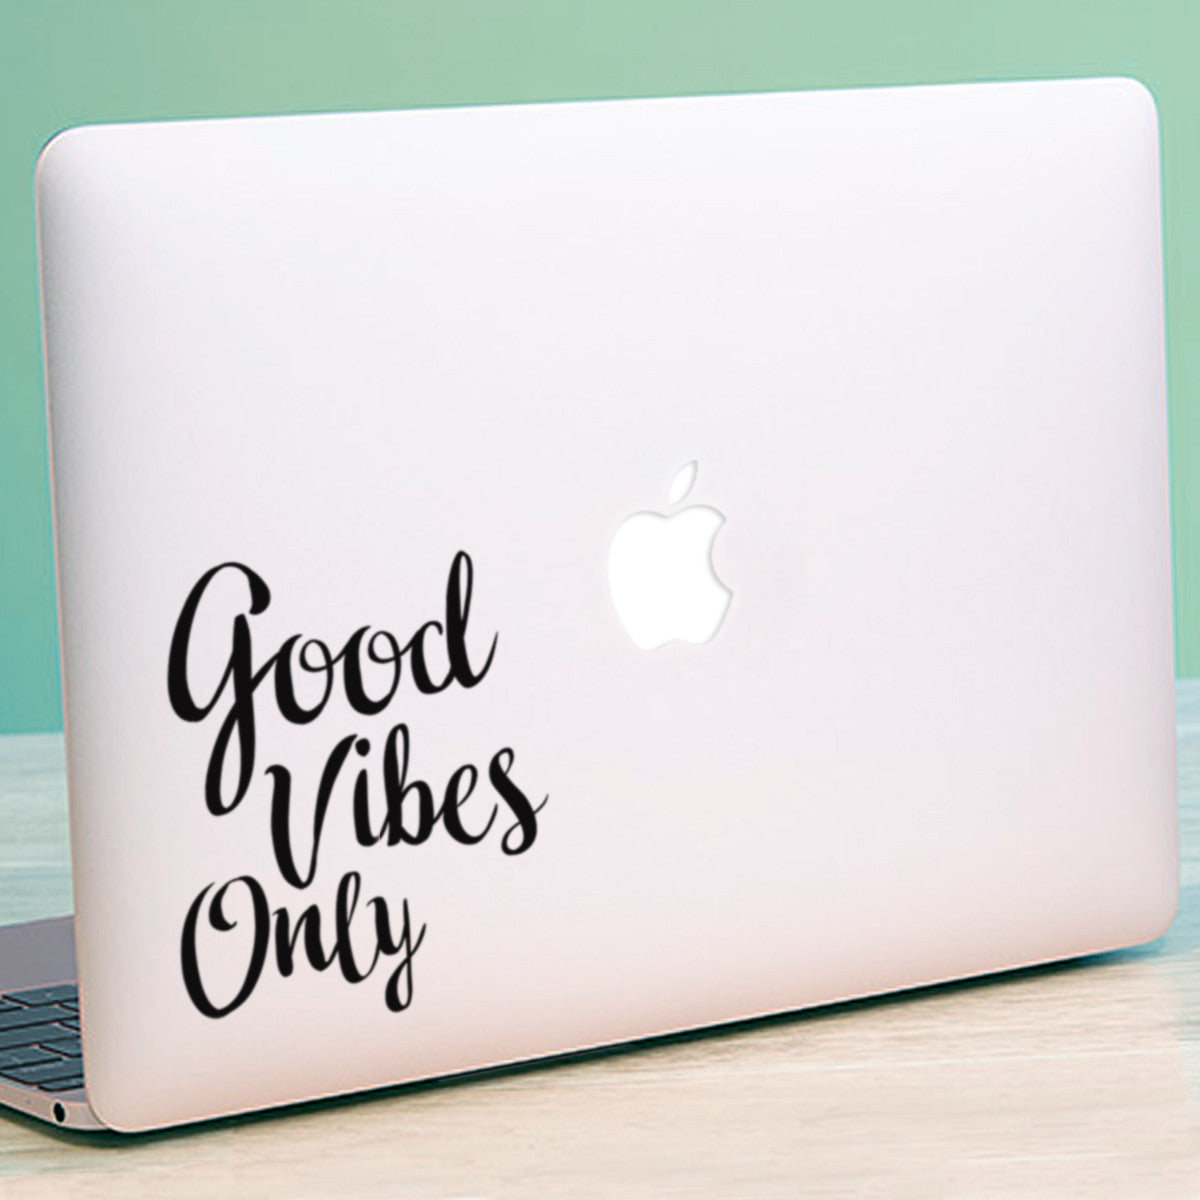 Good Vibes Only Macbook Decal